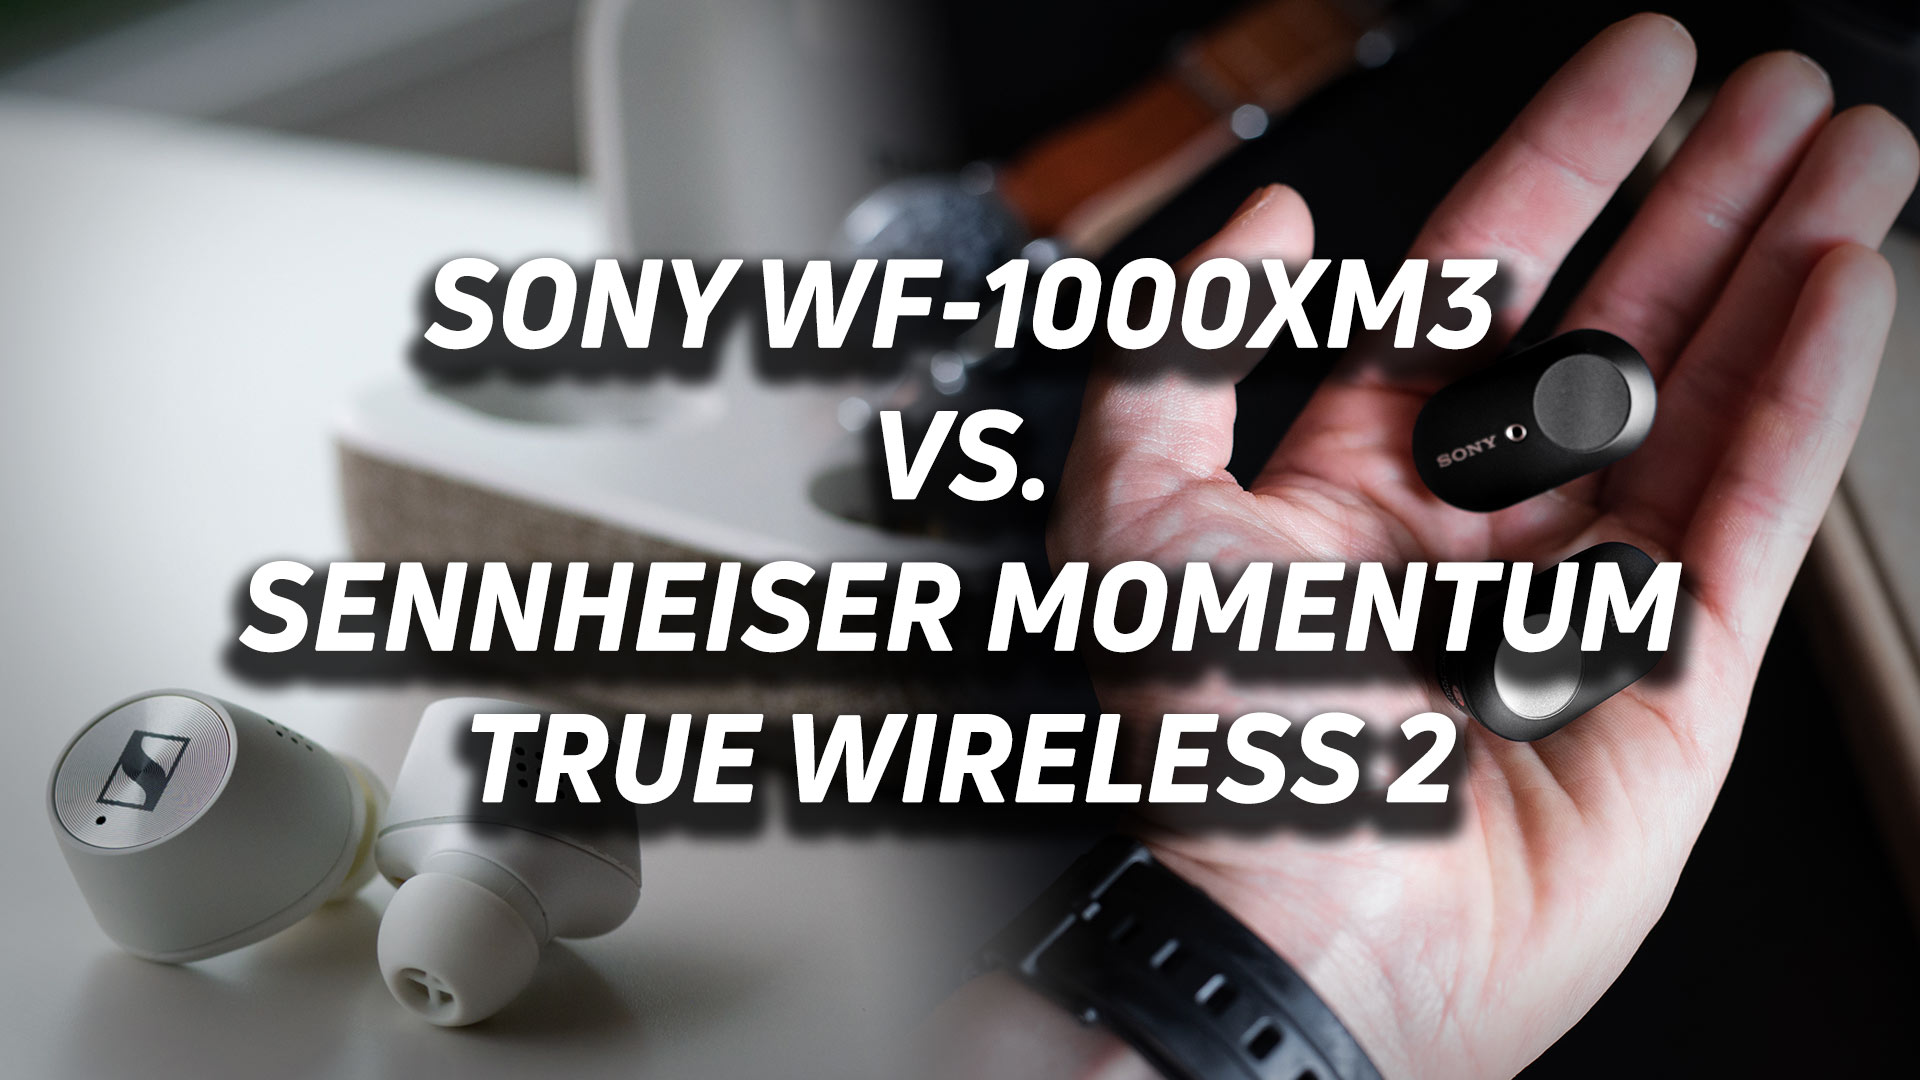 A blended image of the Sennheiser MOMENTUM True Wireless 2 and Sony WF-1000XM3 noise canceling earbuds with text overlaid on top.